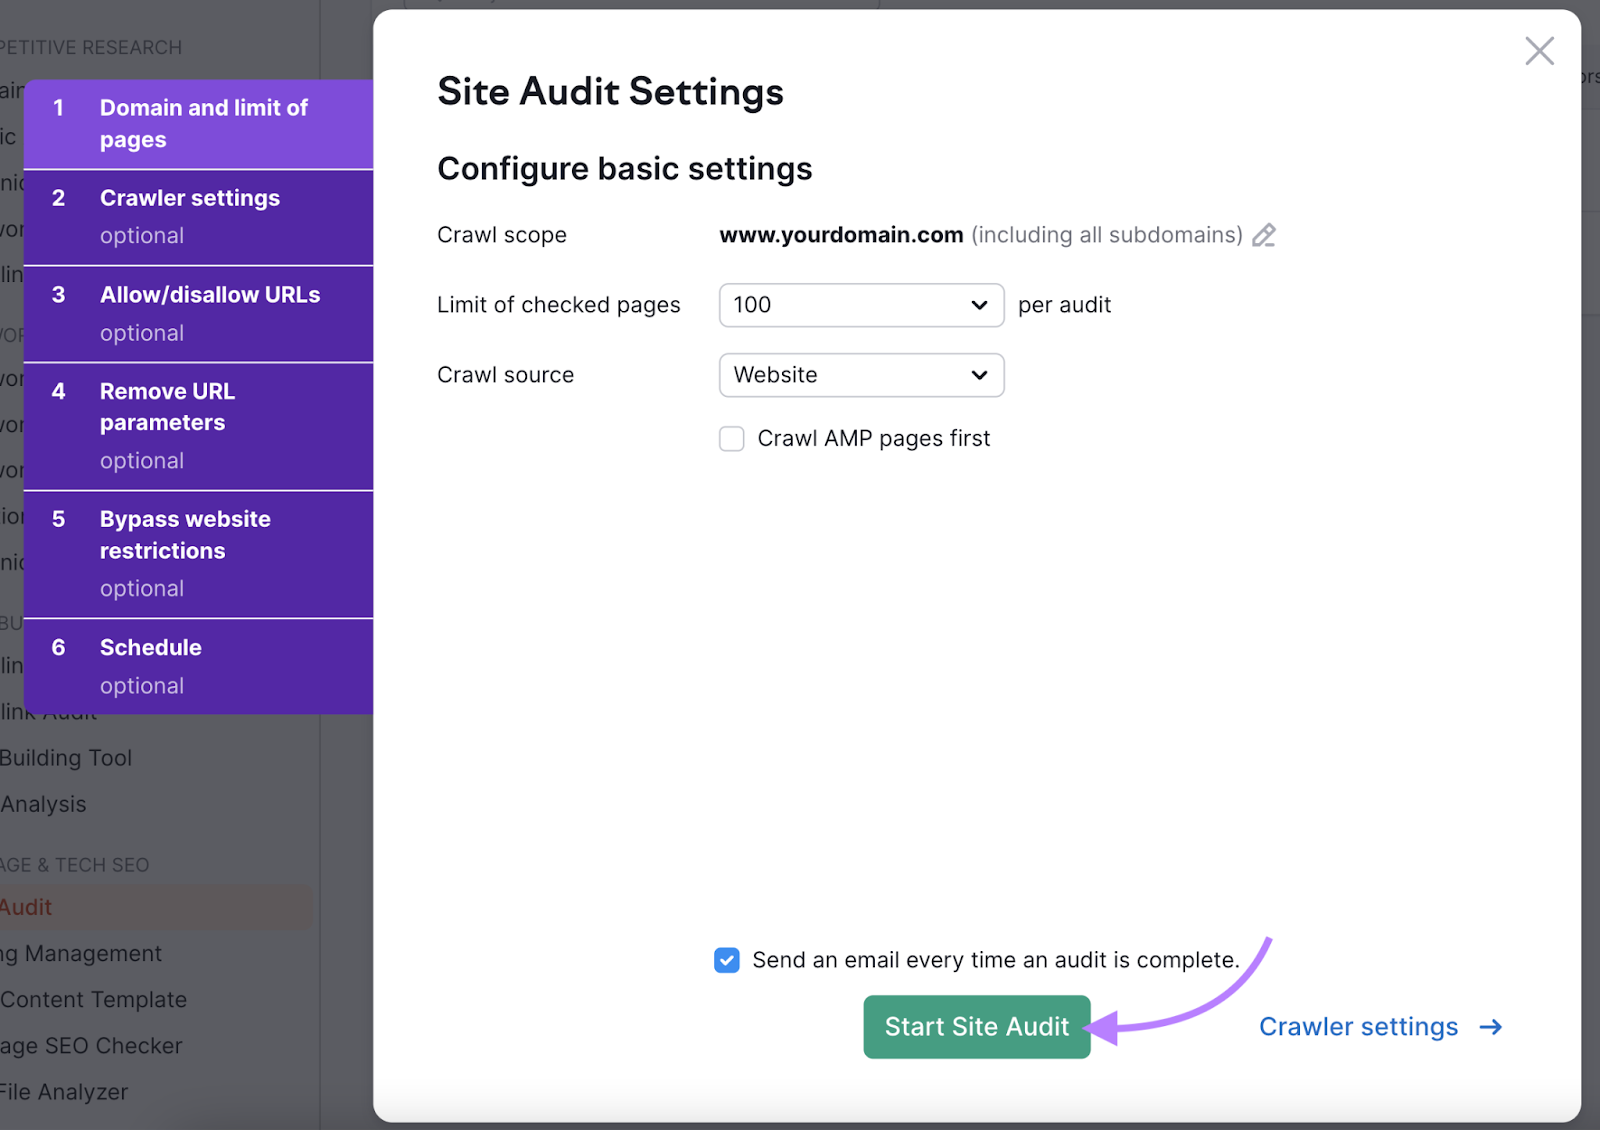 Site Audit Settings page in the Site Audit tool